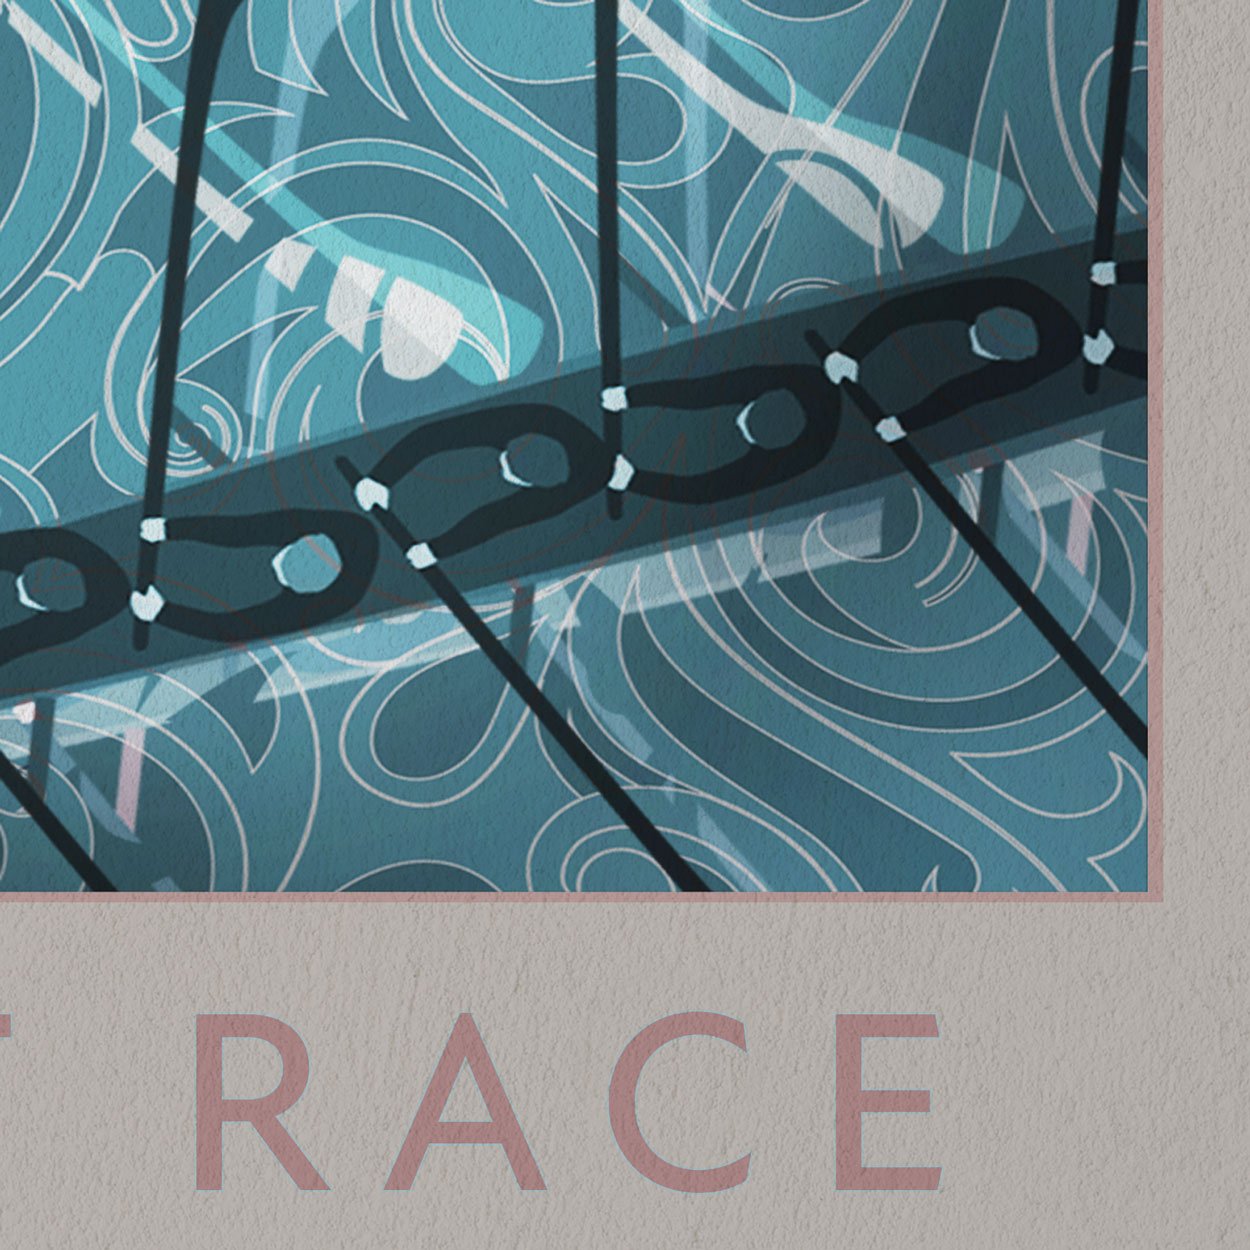 THE BOAT RACE POSTER PRINT